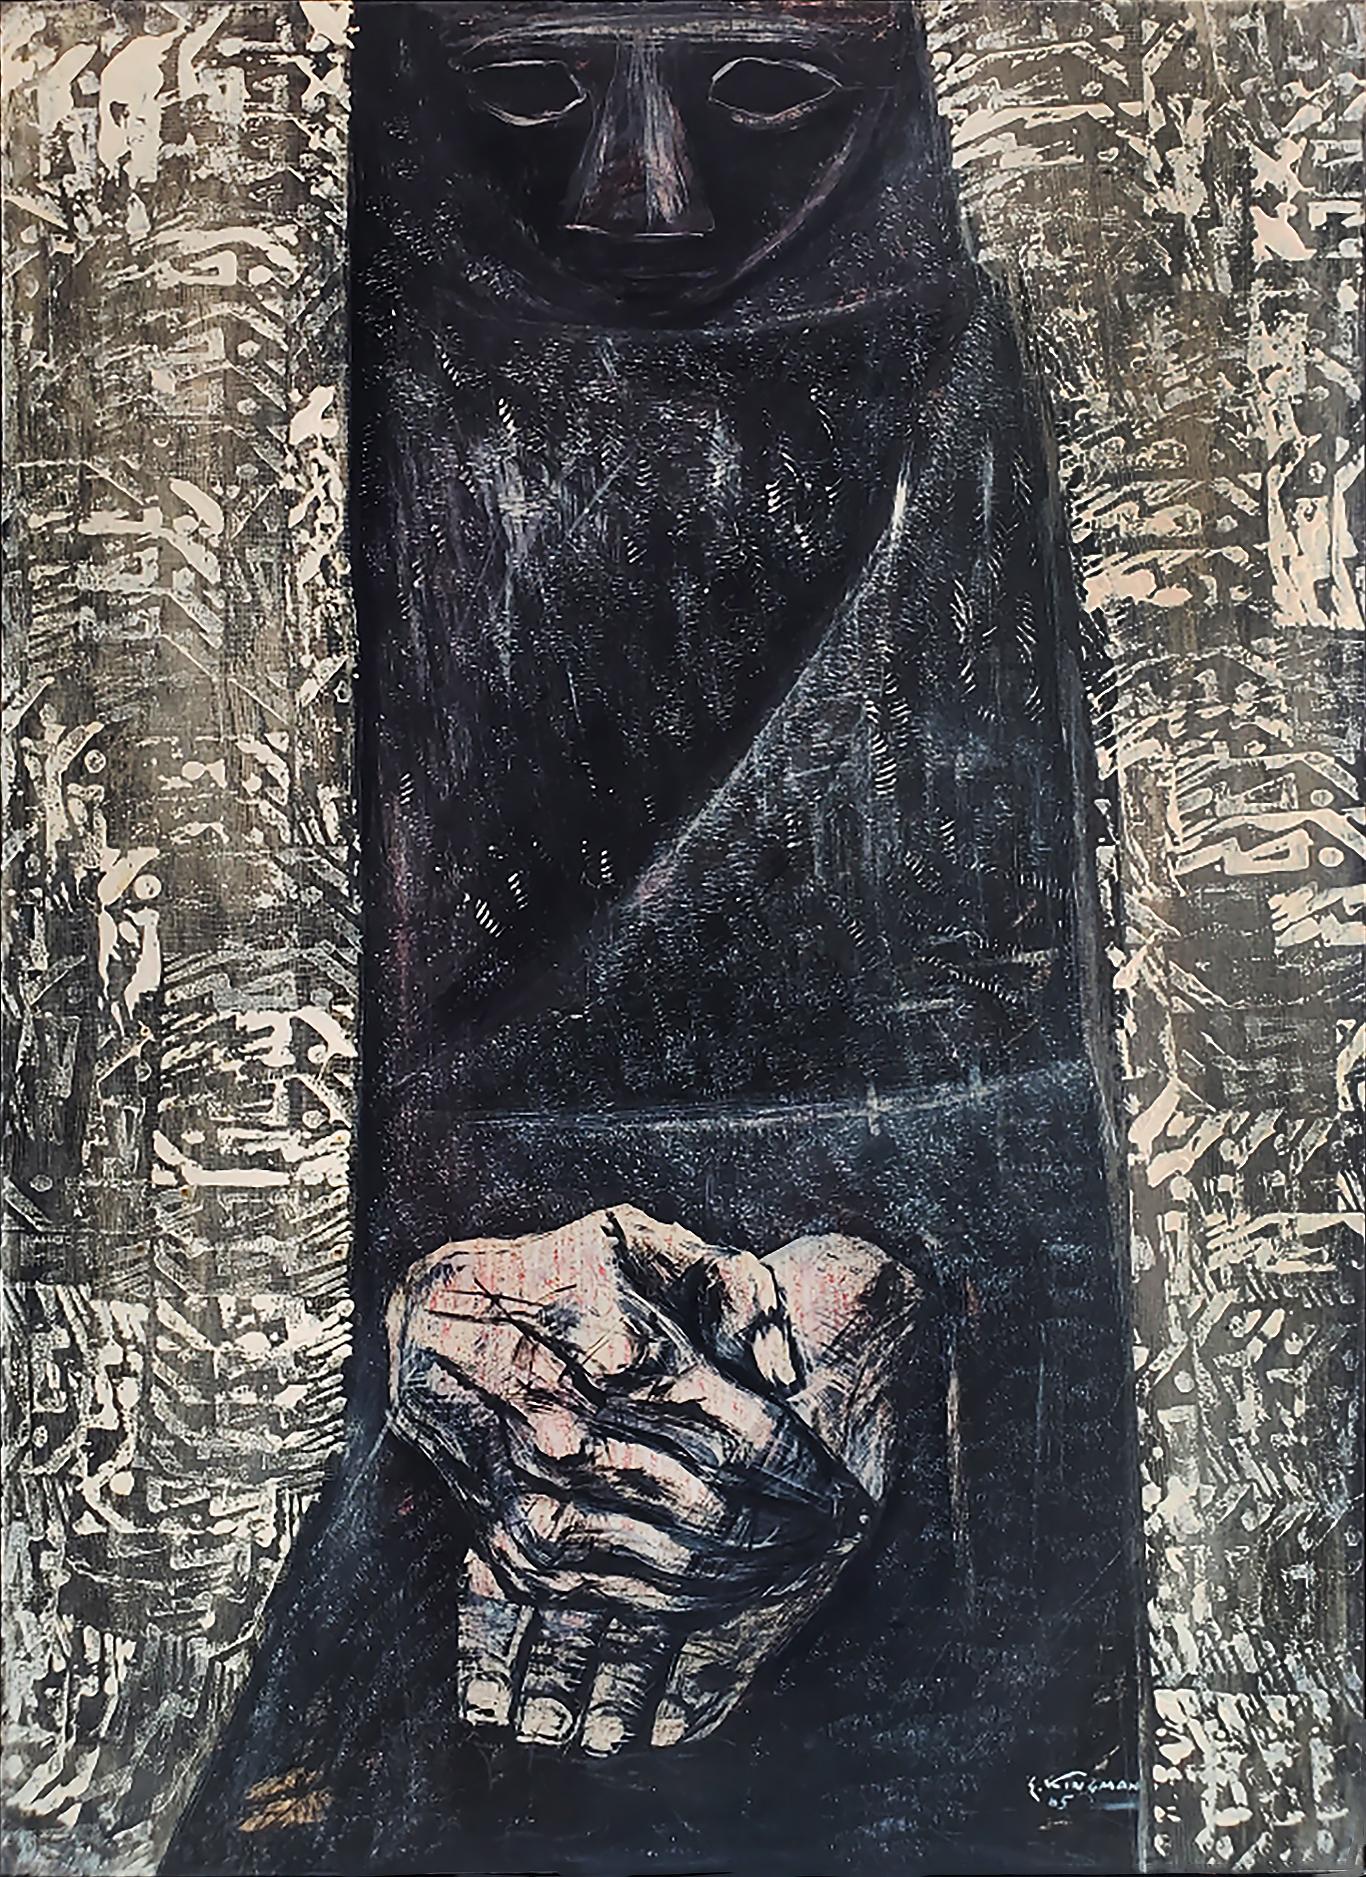 Untitled - Mysterious Figure in Black Pancho and Expressive Hands